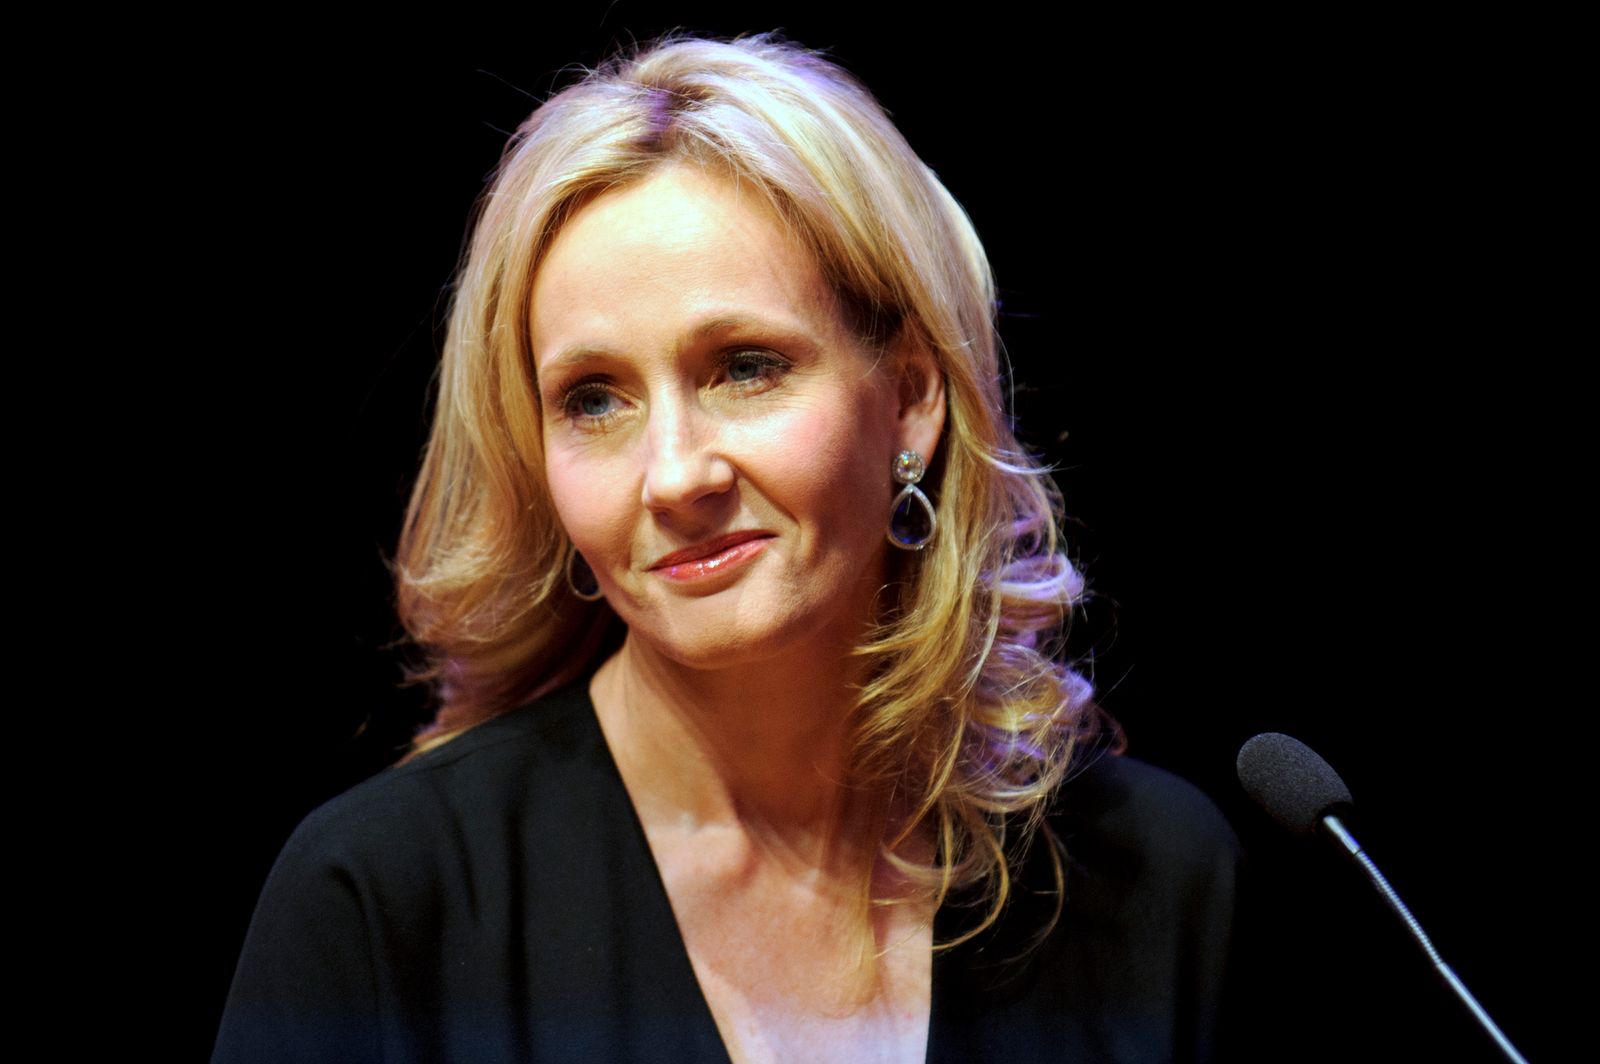 Please Don't Buy This If You're Offered It: J.K. Rowling Urges People Regarding Stolen Harry Potter Prequel